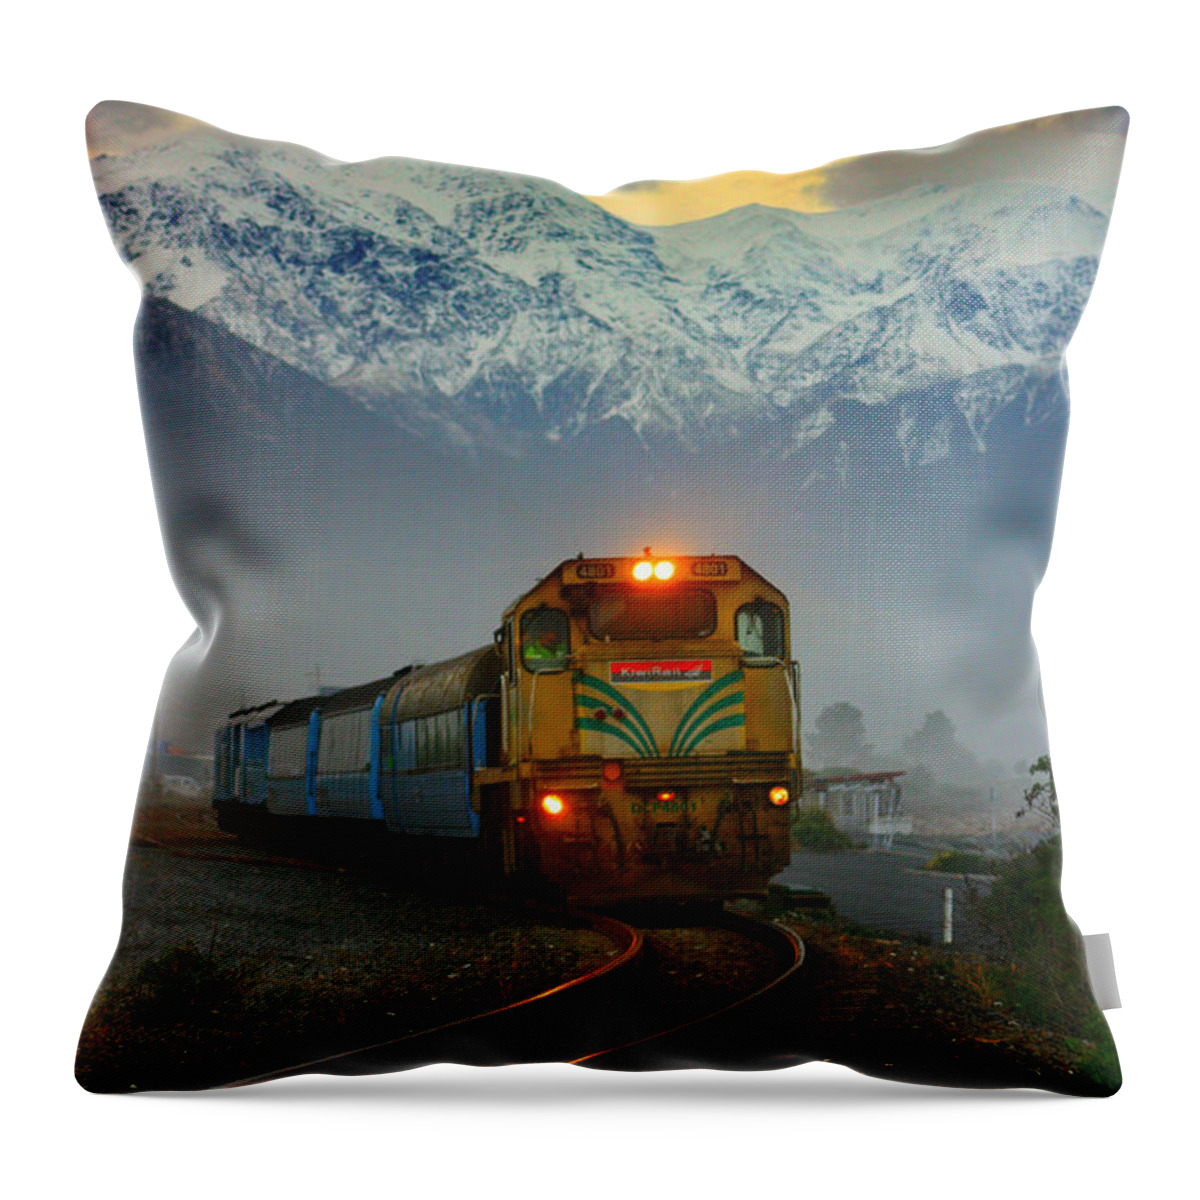 Exotic Rail Throw Pillow featuring the photograph The Southerner Train New Zealand by Amanda Stadther